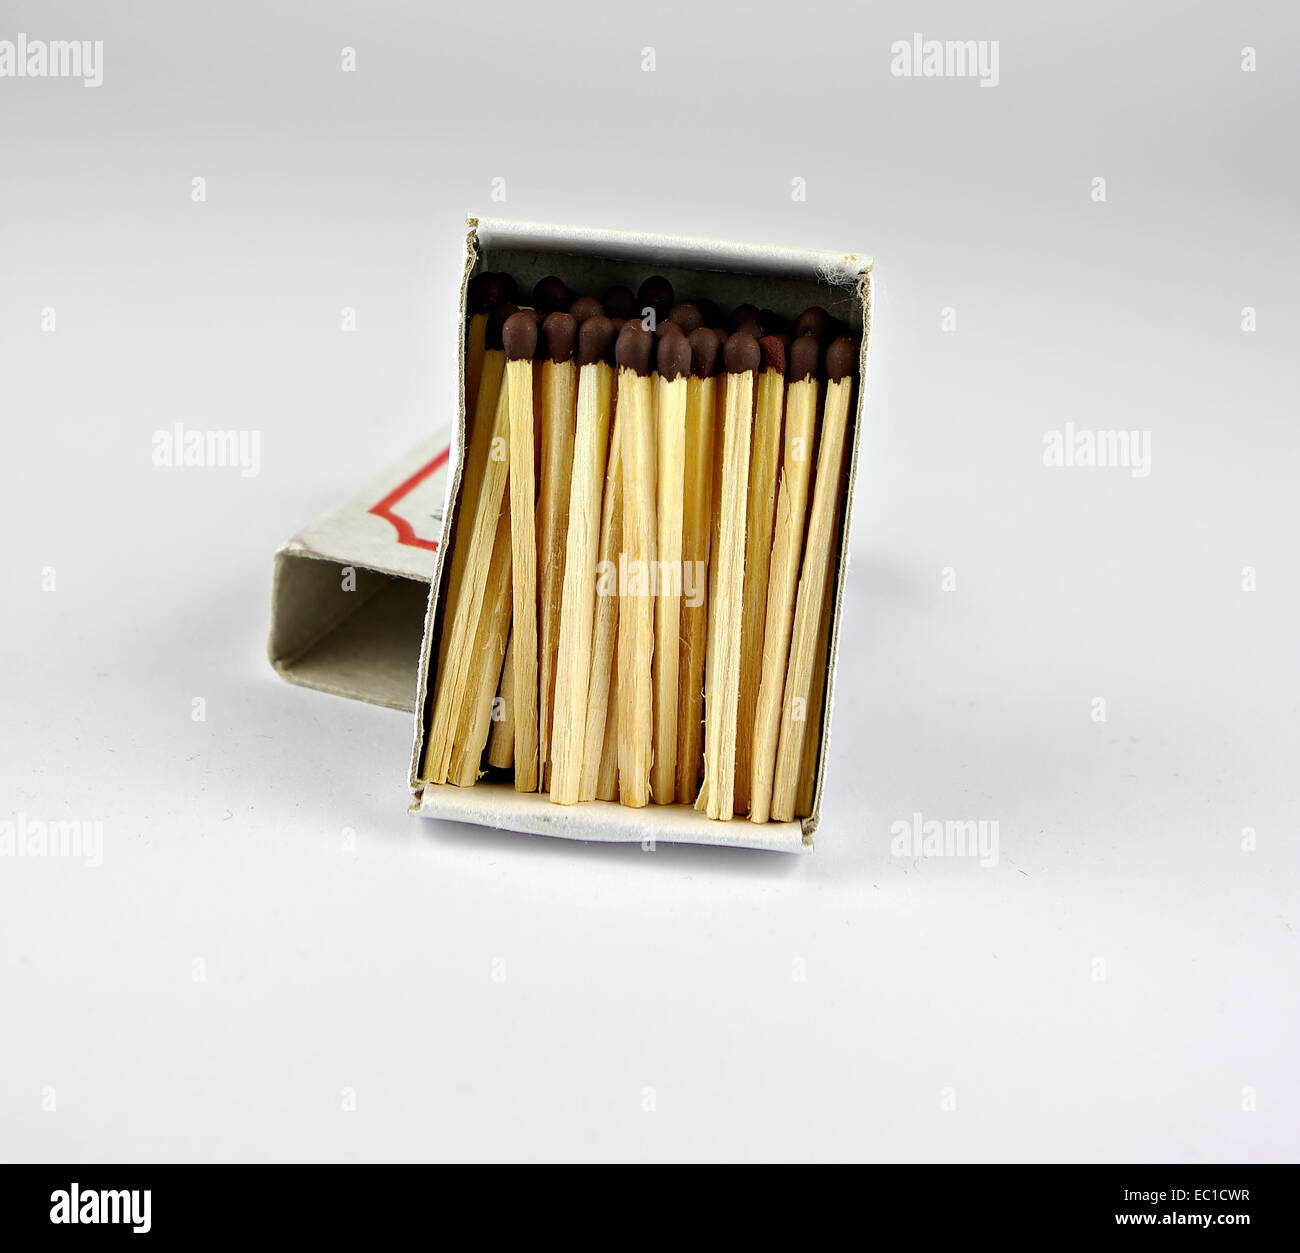 Wood Matches Stock Photo, Picture and Royalty Free Image. Image 2065352.